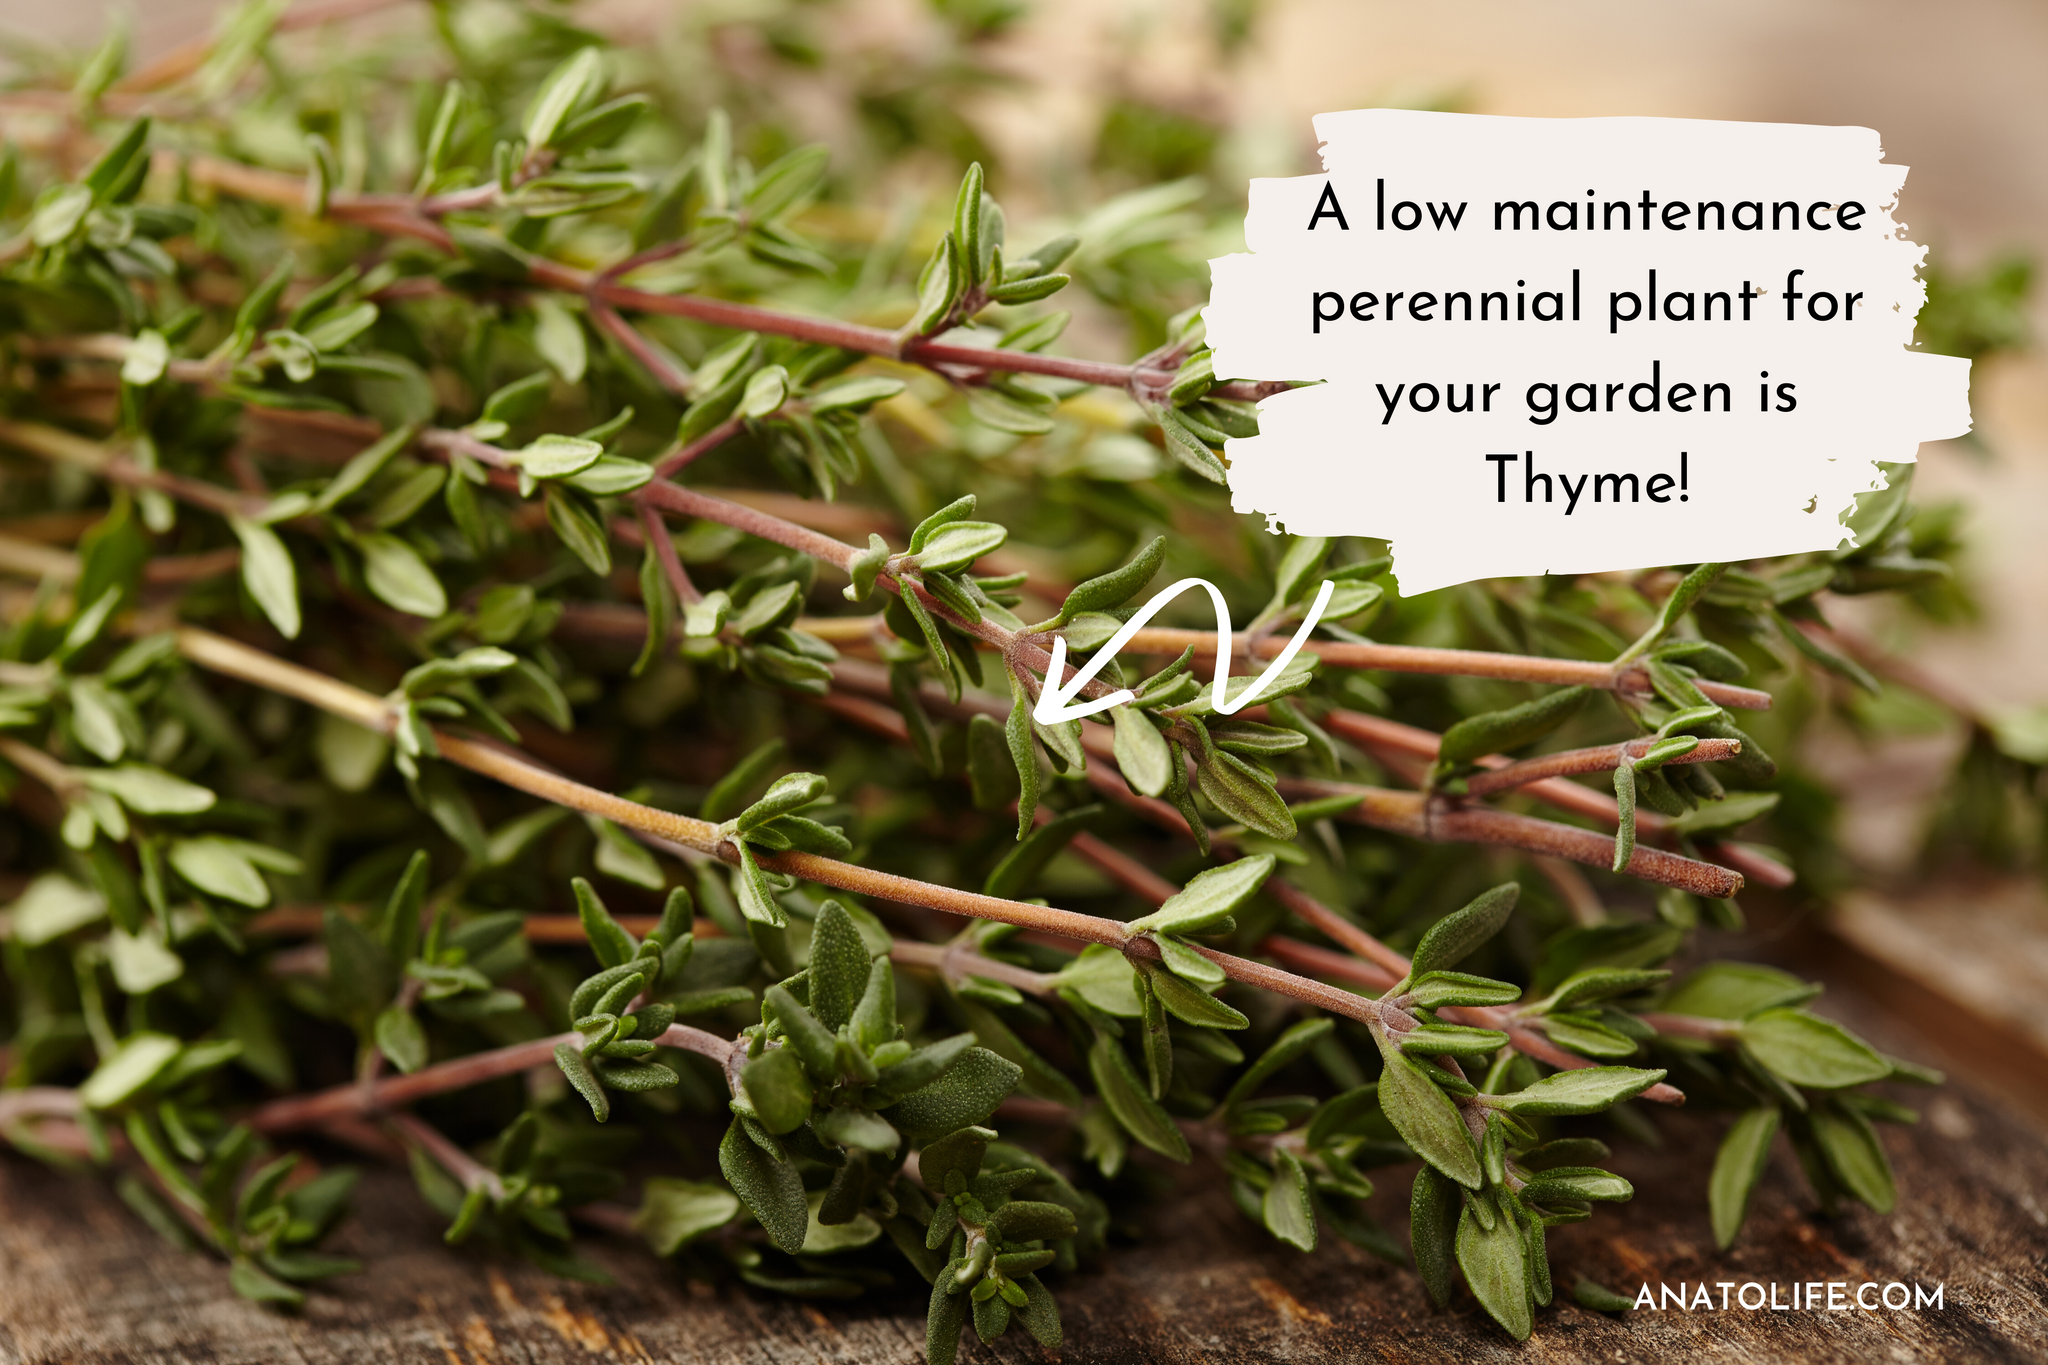 Growing thyme at home